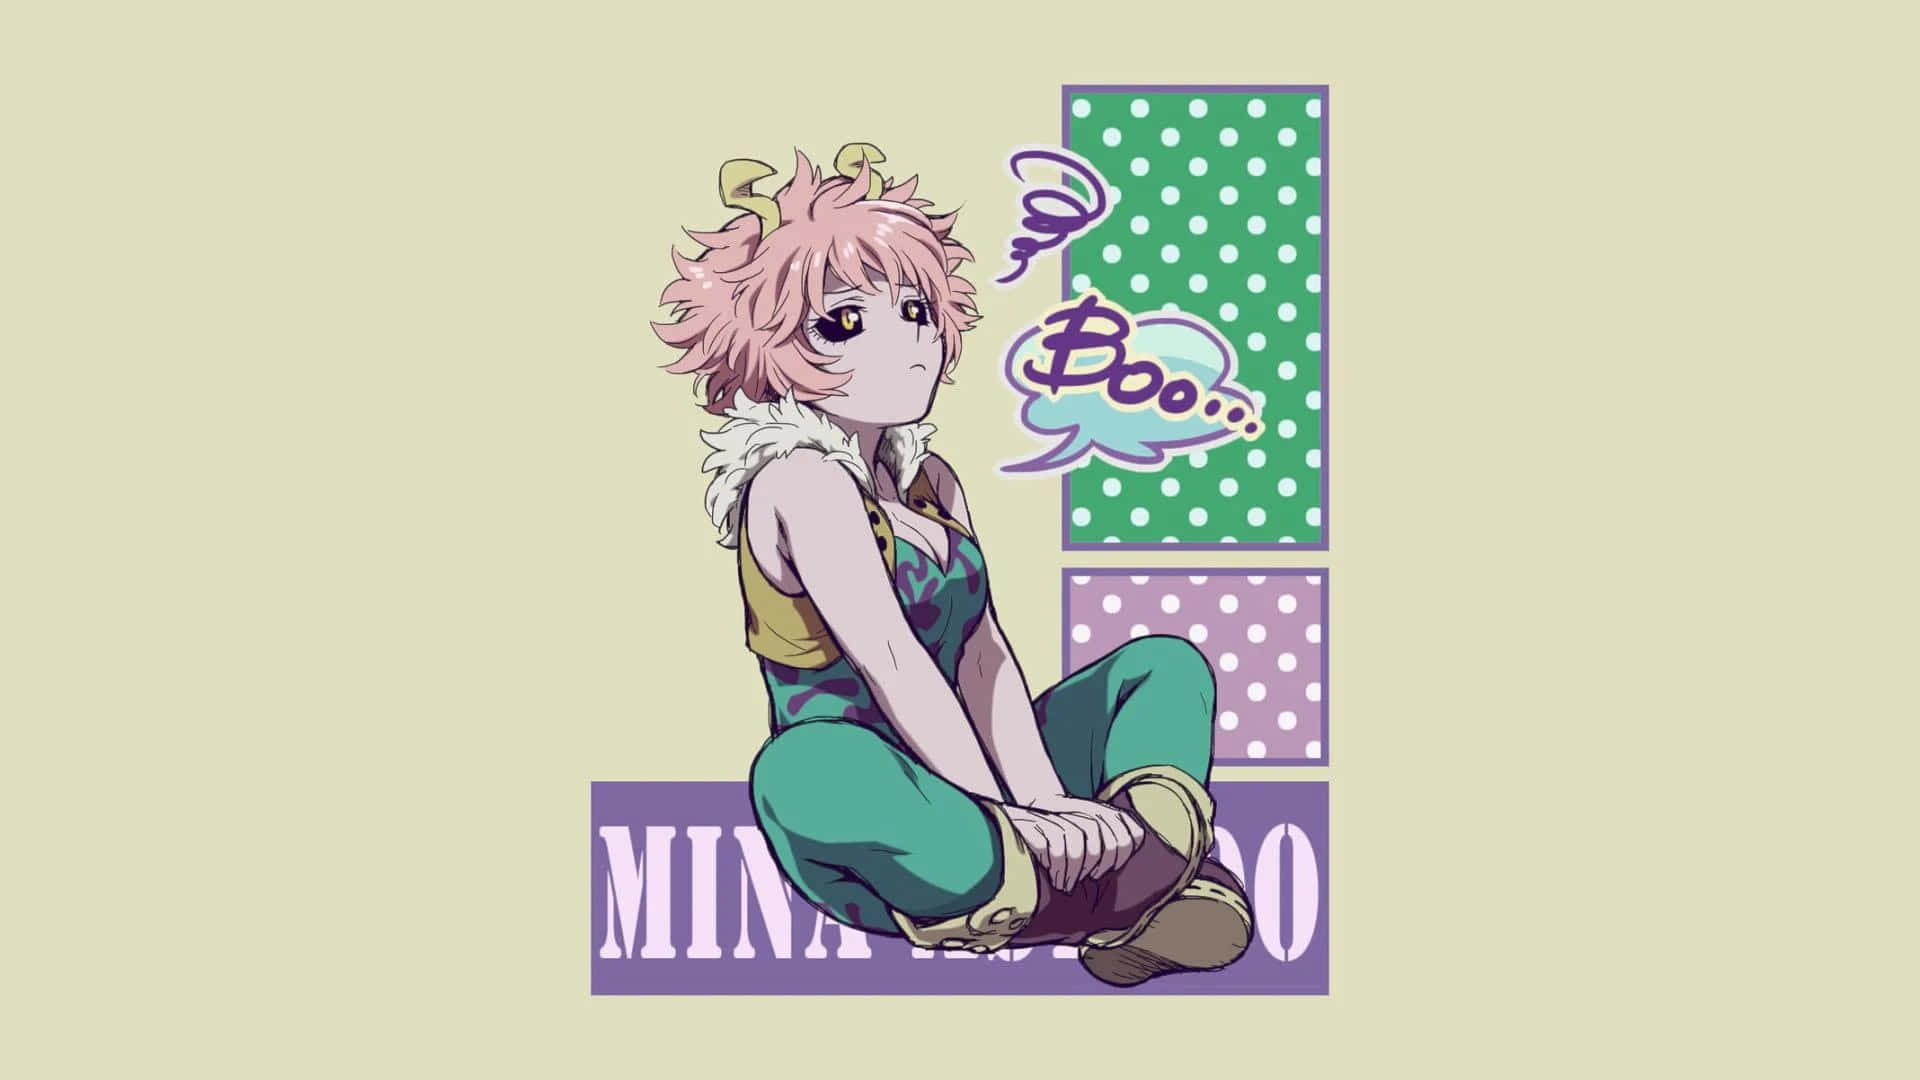 Customize your look and stand out with Ashido! Wallpaper